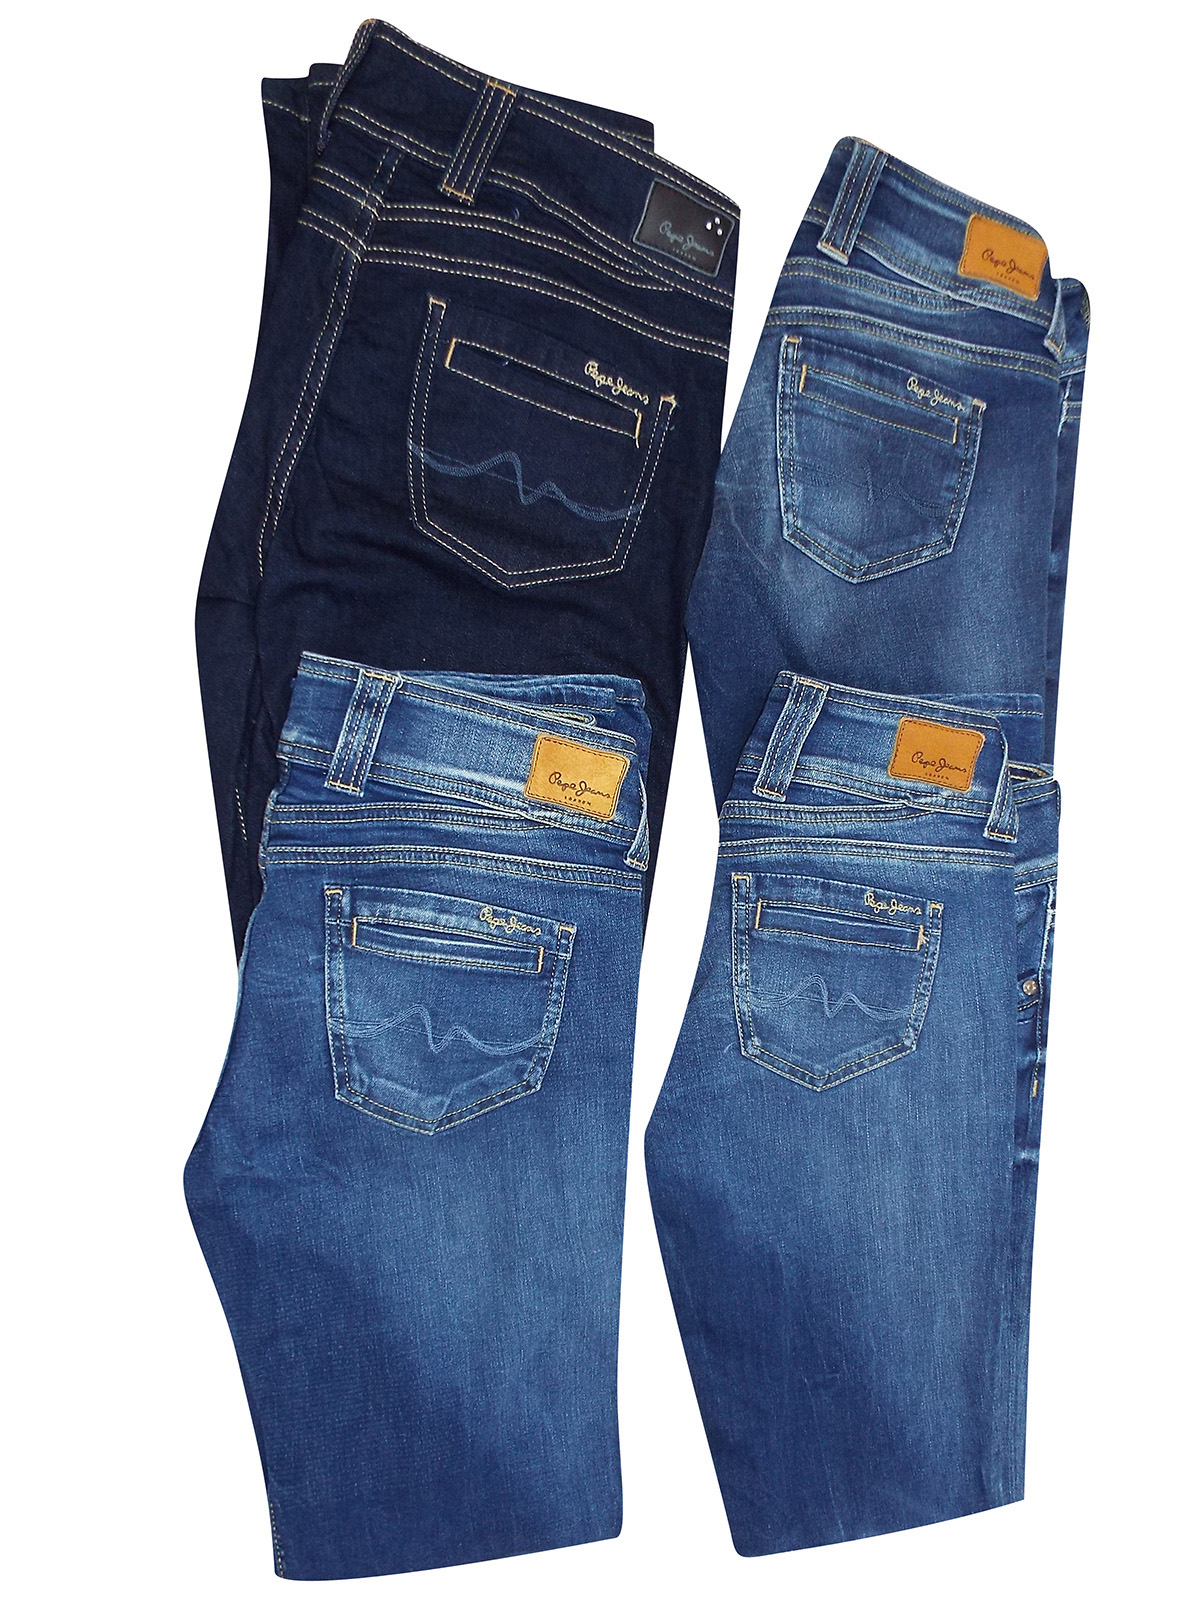 Pepe Jeans - - Pepe Jeans GEN Mixed Pack of Straight Fit Jeans - Waist ...